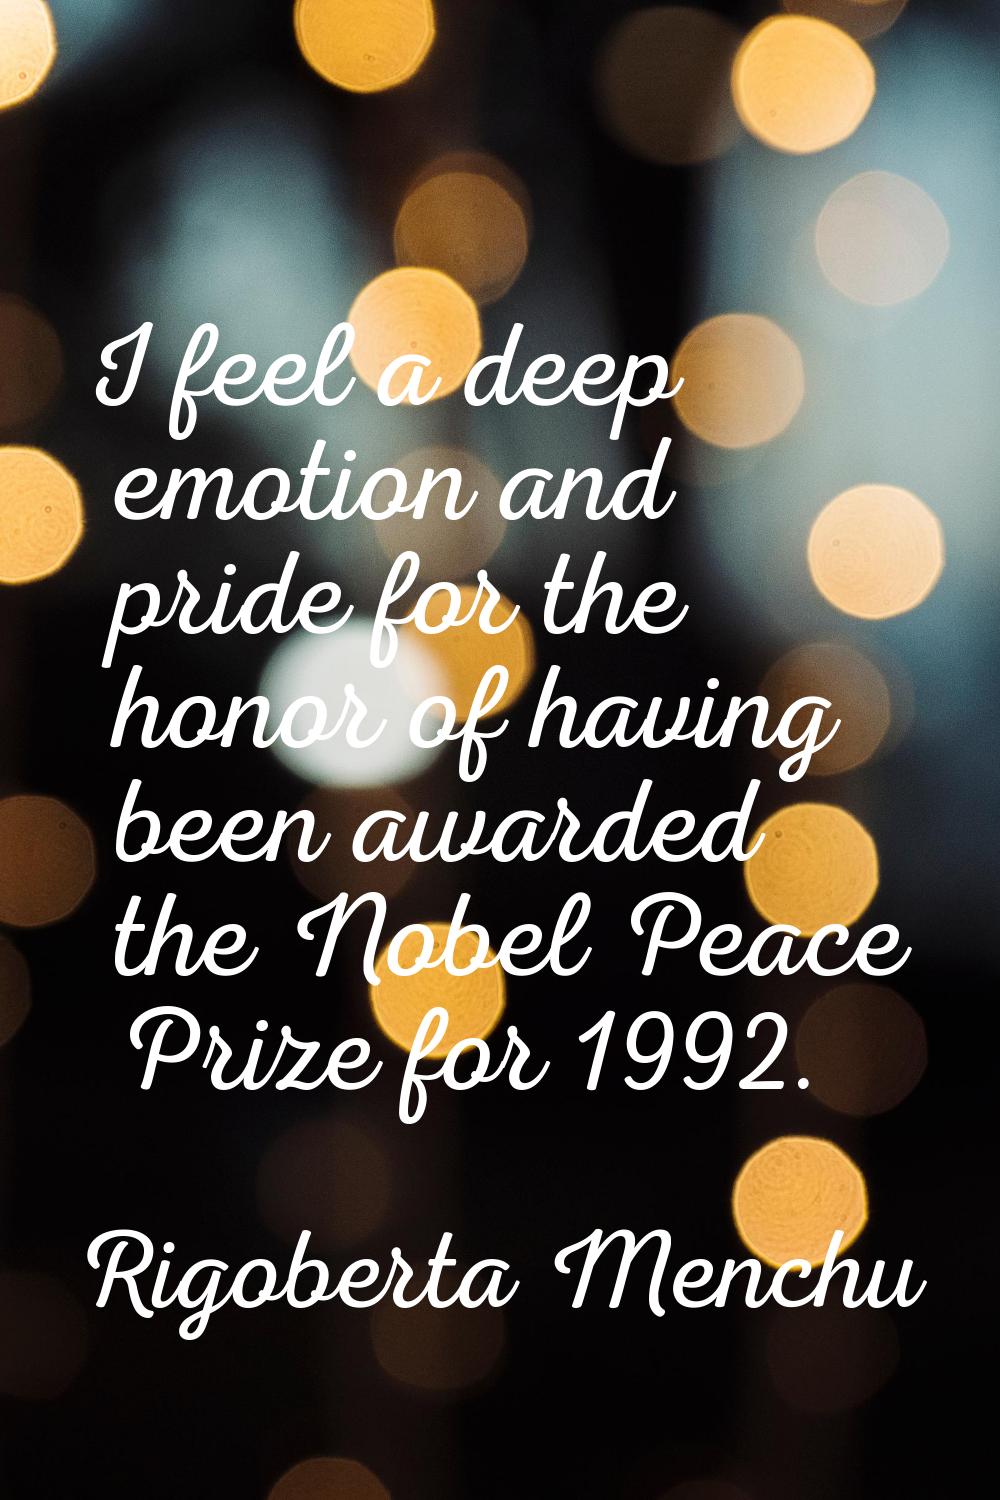 I feel a deep emotion and pride for the honor of having been awarded the Nobel Peace Prize for 1992